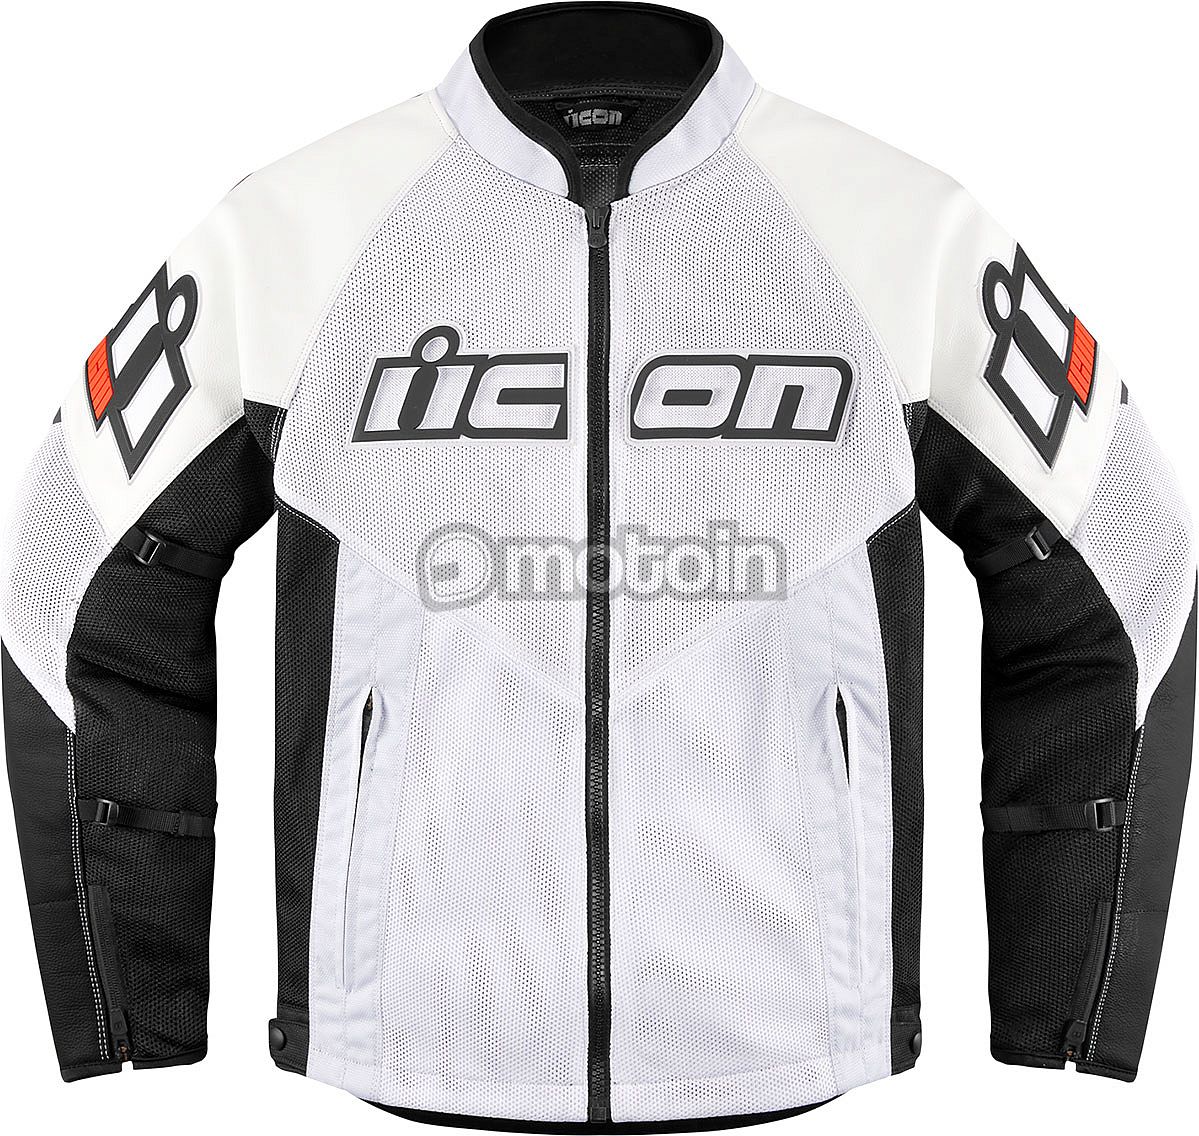 Icon Mesh AF leather/textile jacket, 2nd choice item